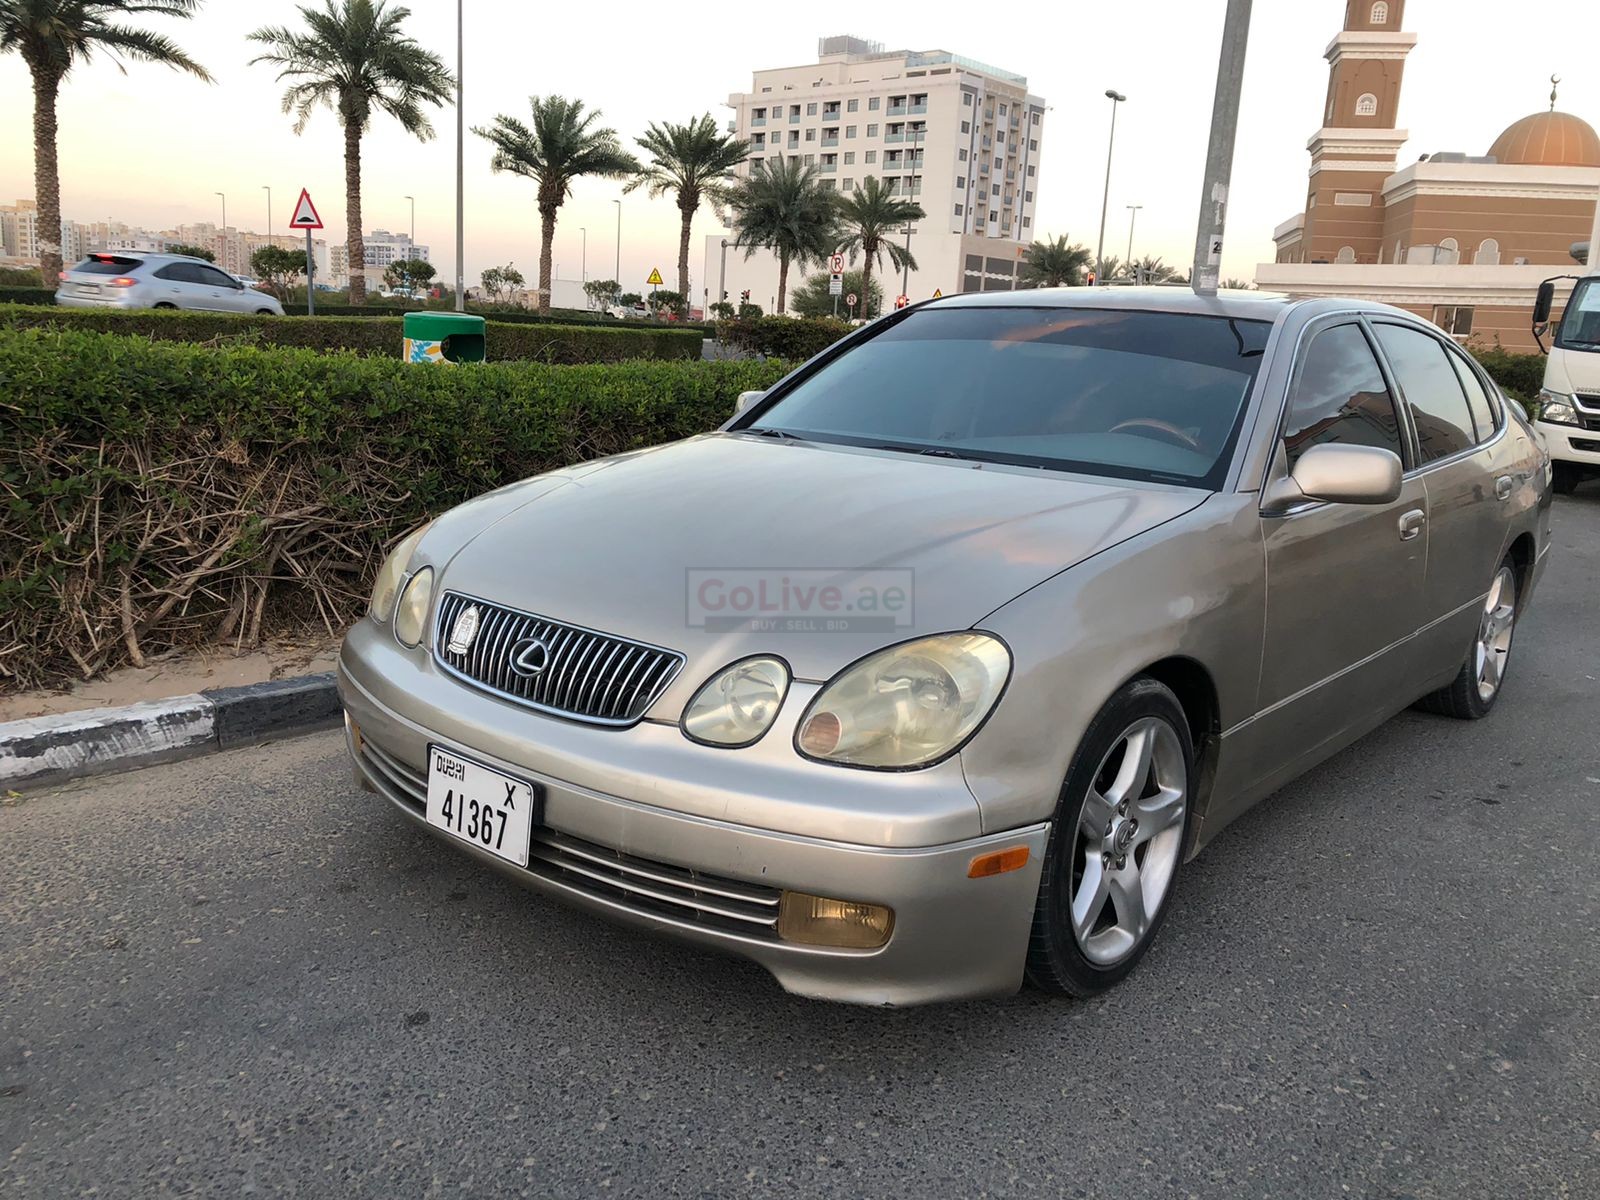 LEXUS-GS.430 -2001 -FULLY LOADED ,TOP OF THE LINE-IN PERFECT CONDITION  CLEAN CAR« Fixed price» 12900 – UAE Classifieds